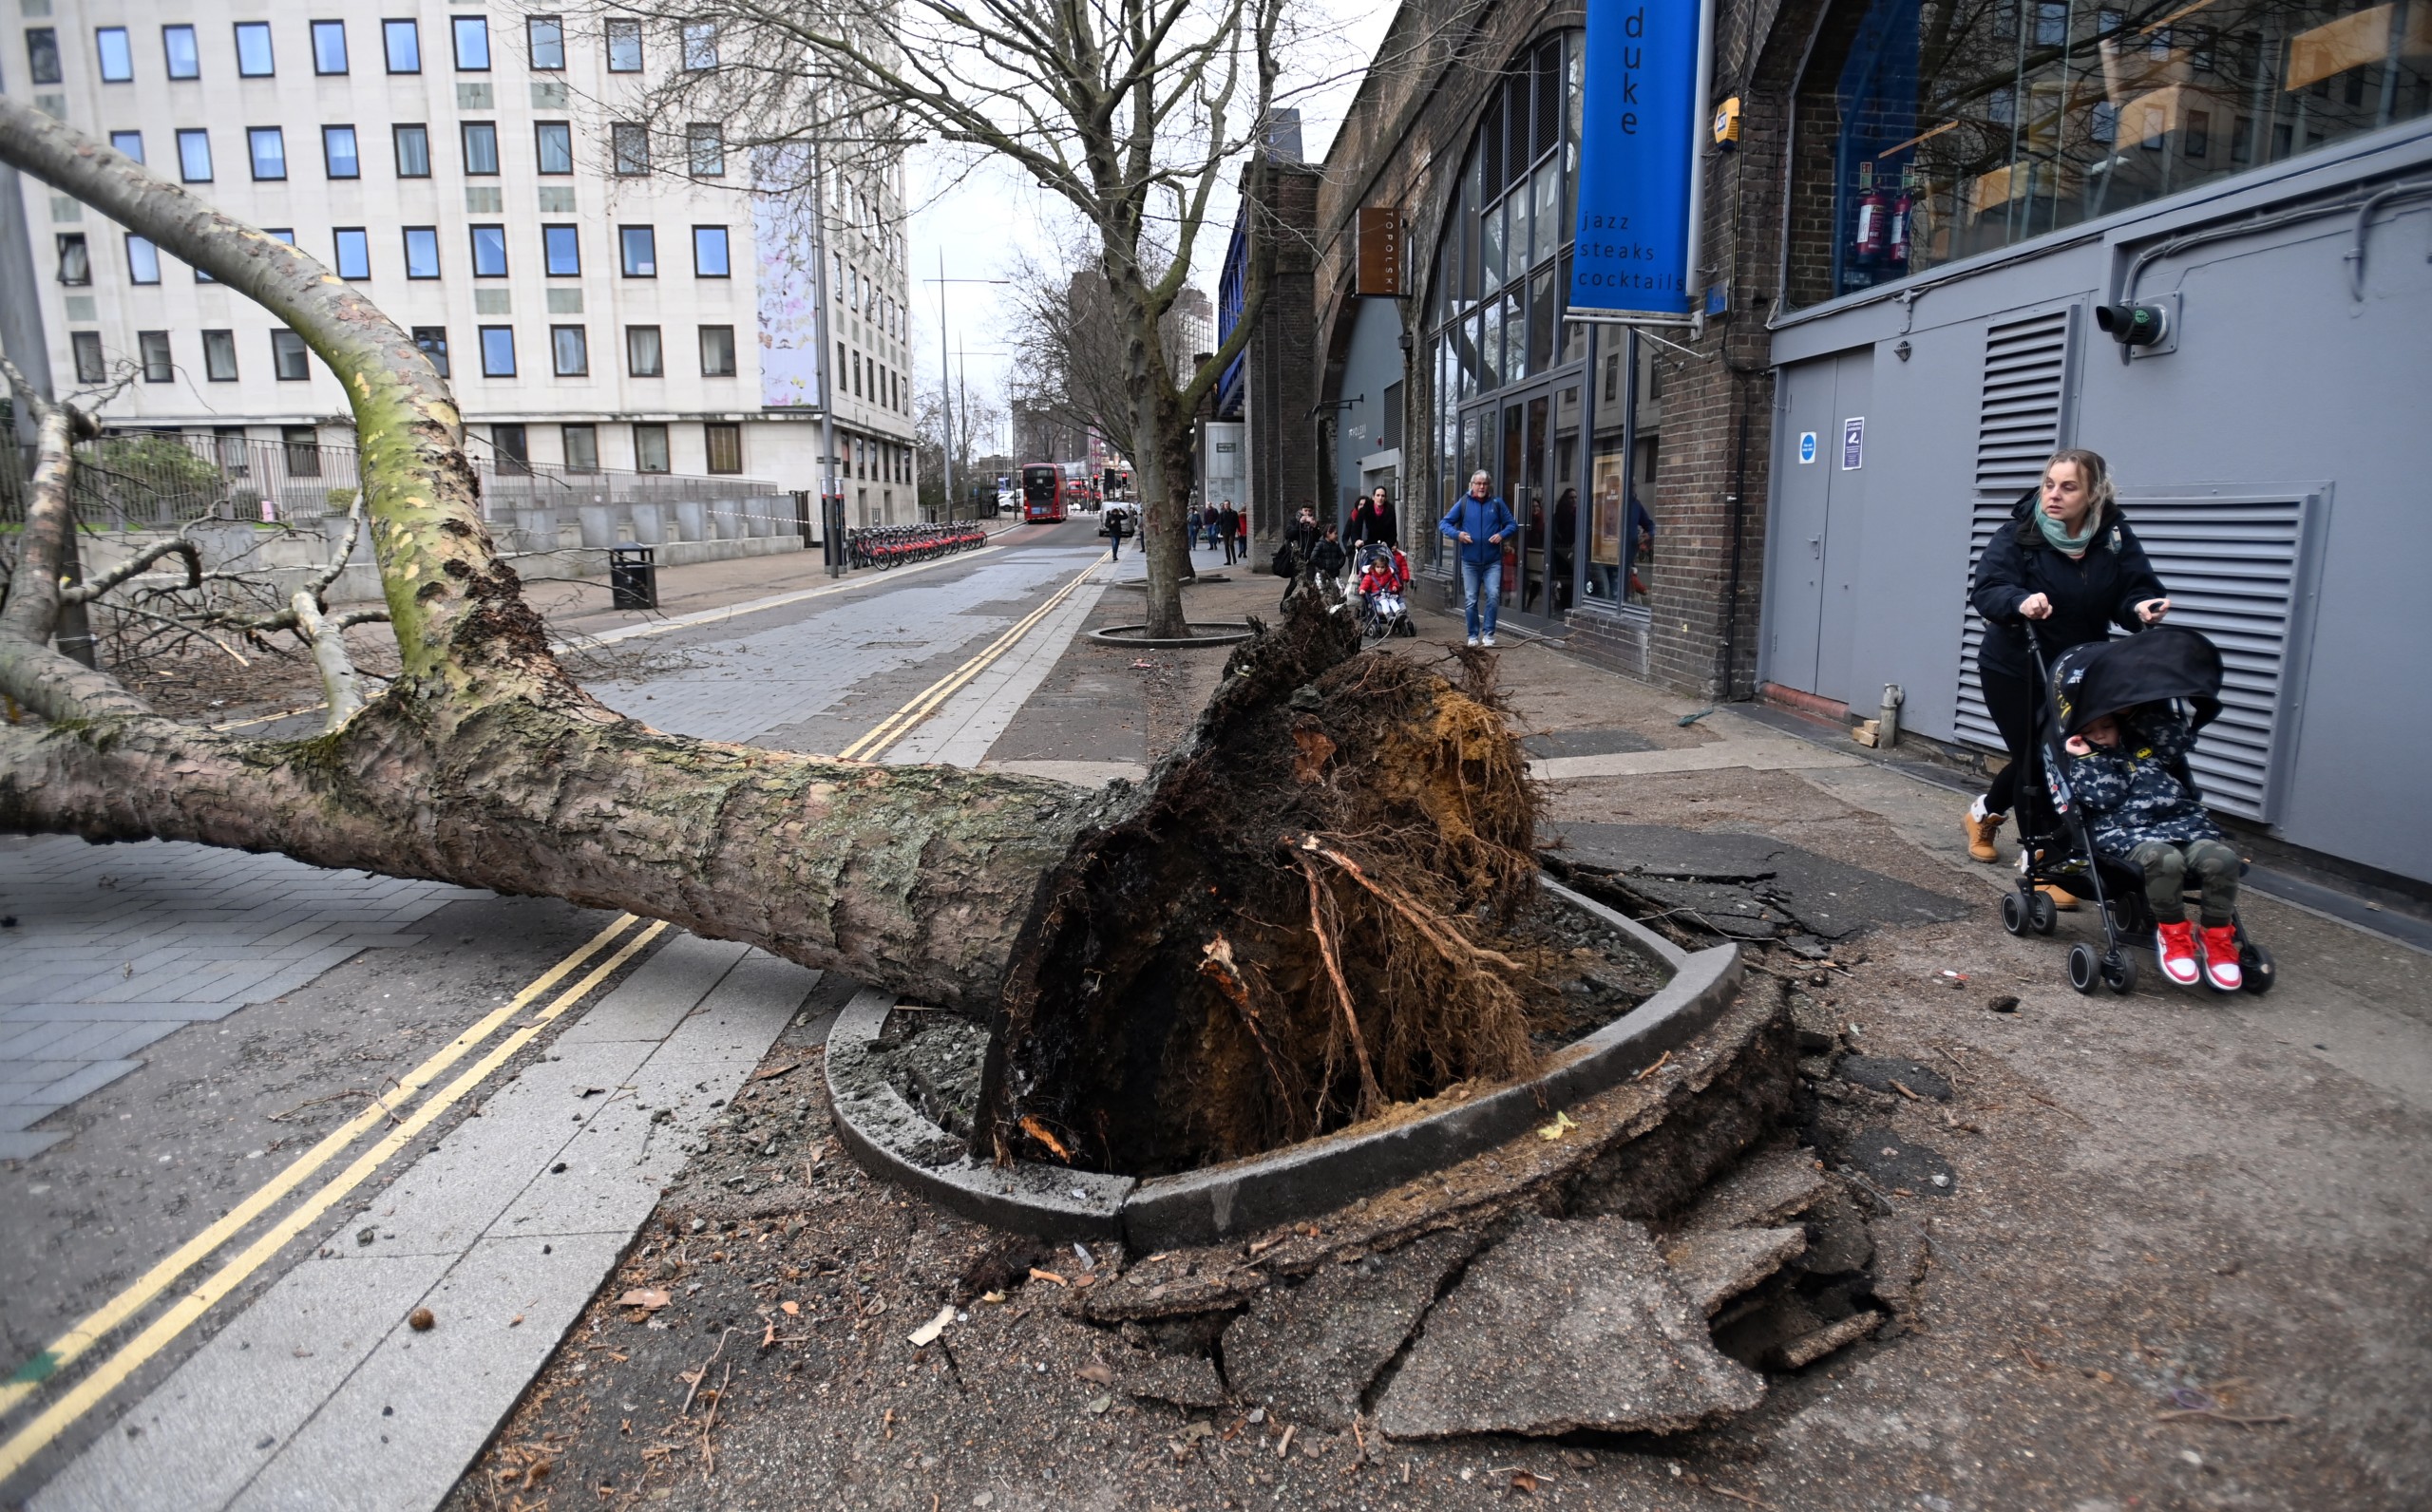 epa09769043 A mother pushes her child past a fallen tree brought down by strong winds during Storm Eunice in London, Britain, 18 February 2022. The UK's Met Office has issued a red warning 'danger to life' for Storm Eunice which is causing major disruption across most parts of the UK.  EPA/ANDY RAIN